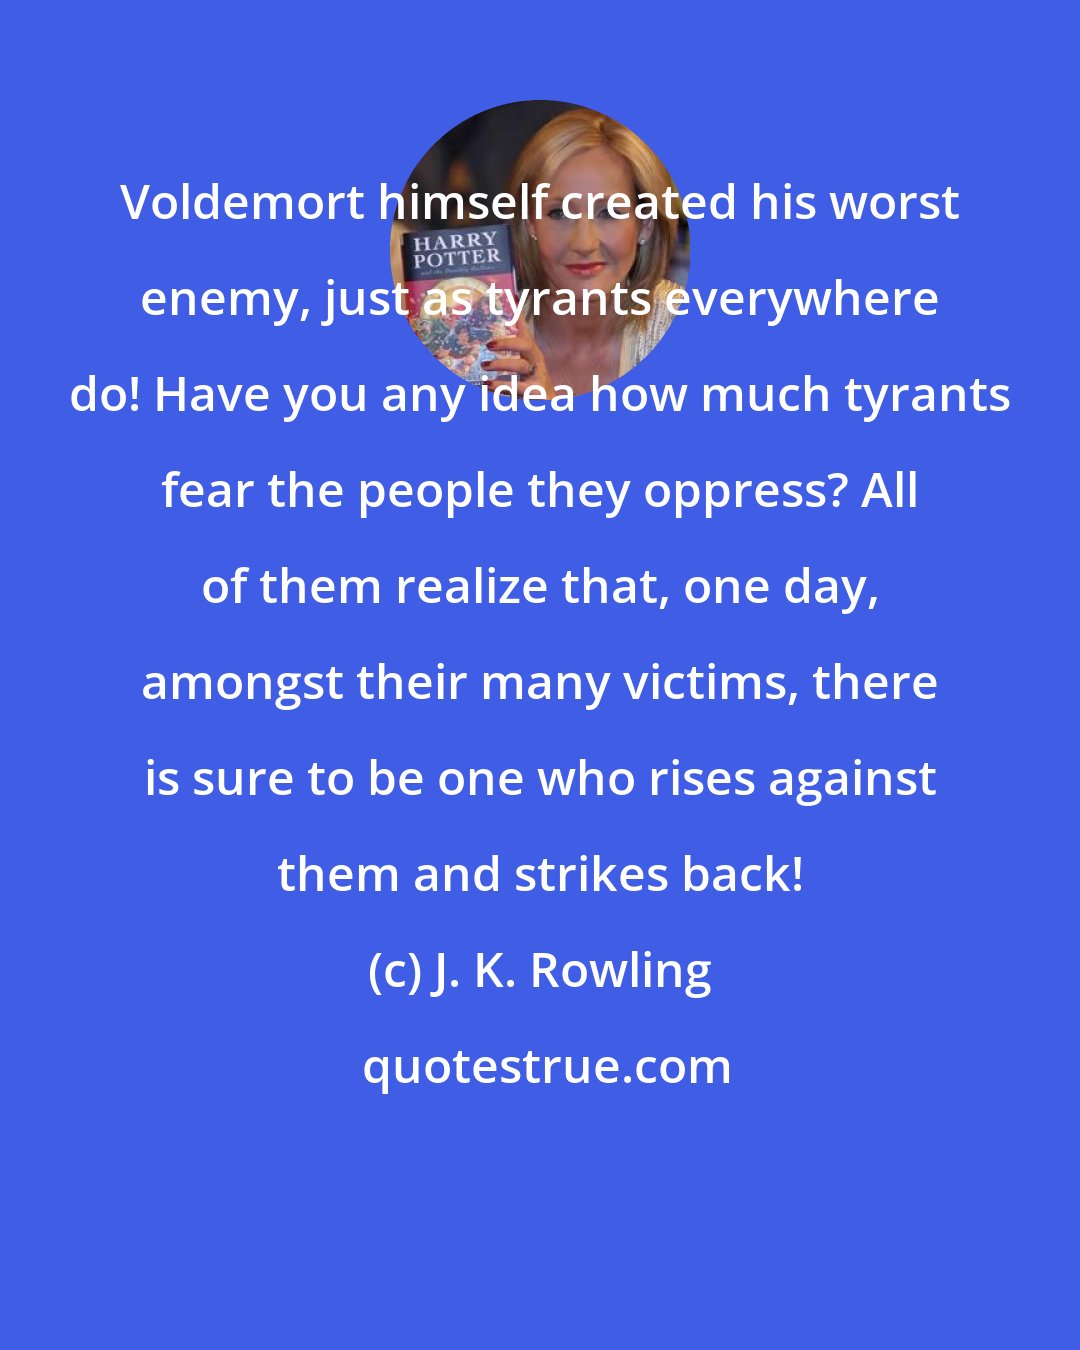 J. K. Rowling: Voldemort himself created his worst enemy, just as tyrants everywhere do! Have you any idea how much tyrants fear the people they oppress? All of them realize that, one day, amongst their many victims, there is sure to be one who rises against them and strikes back!